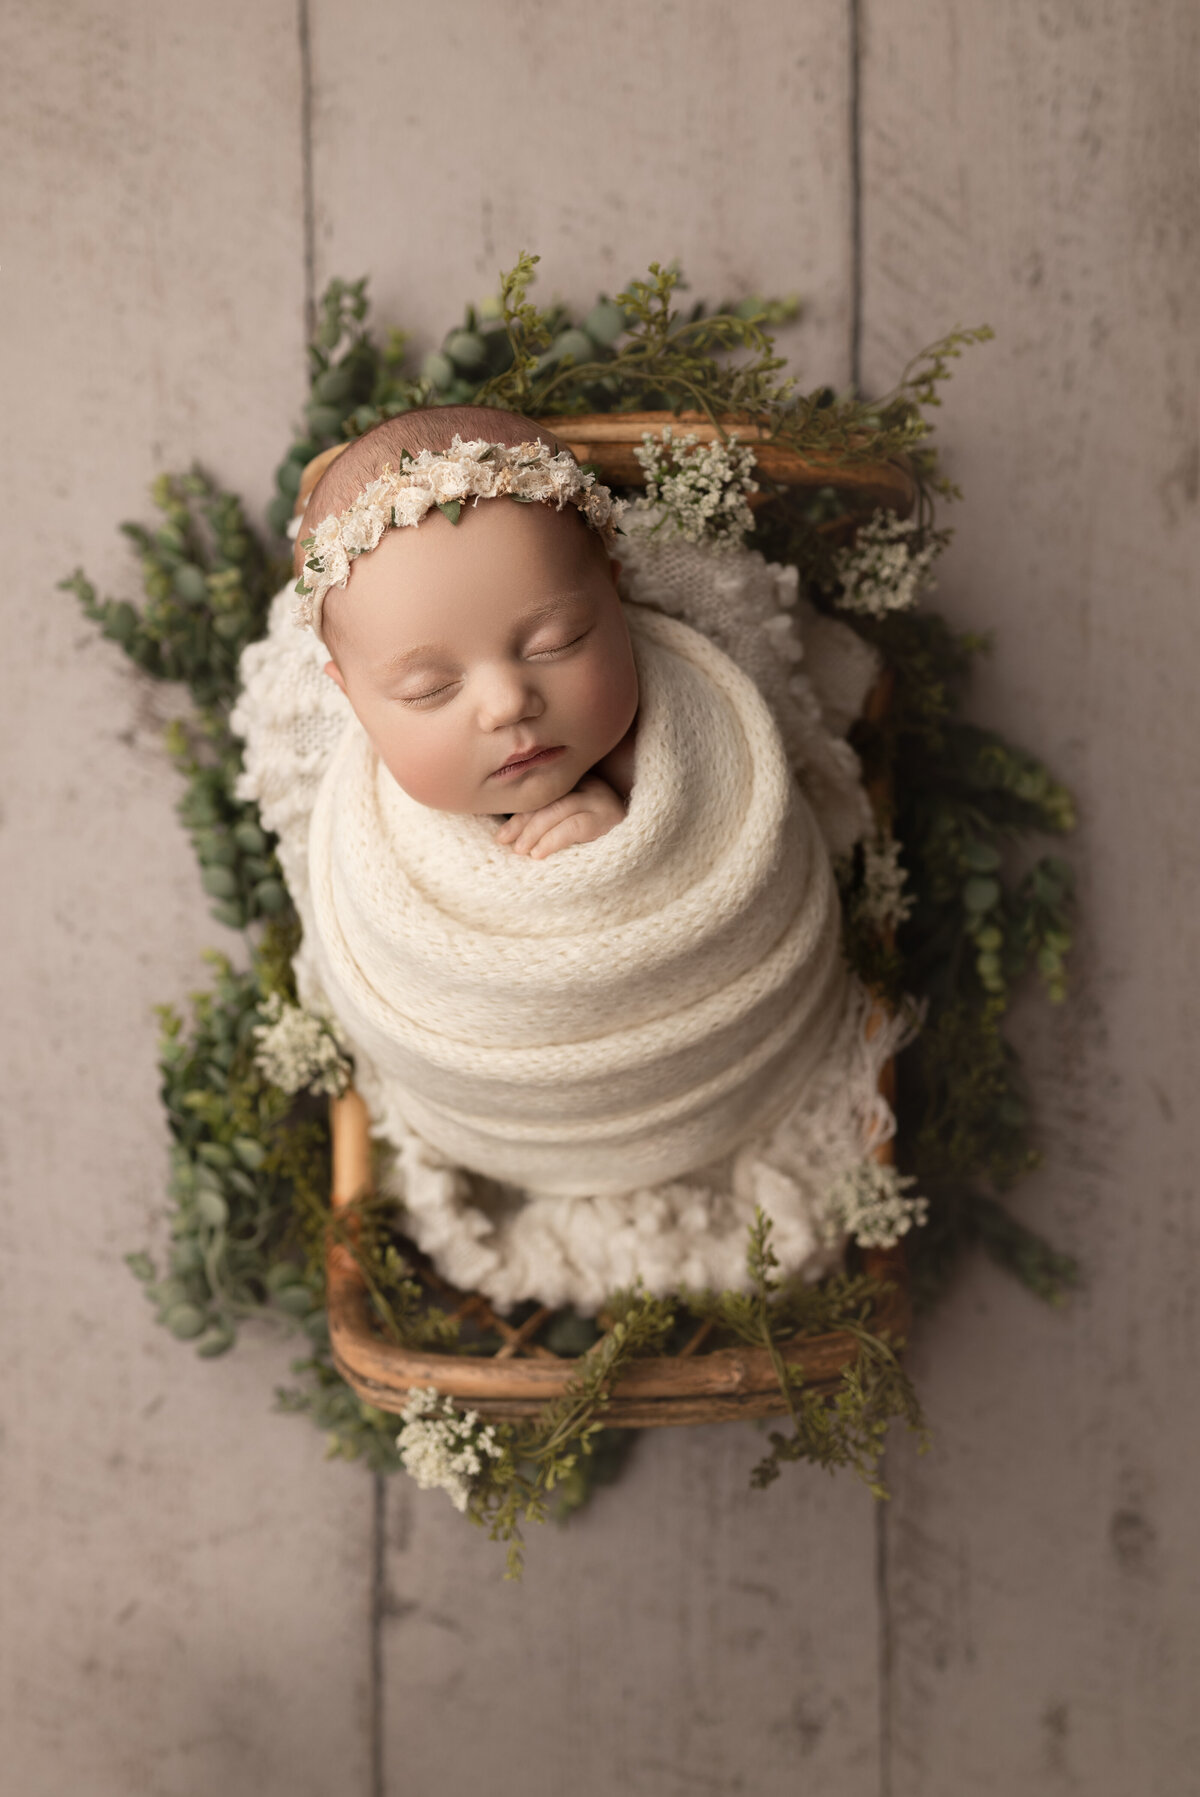 Fine art newborn photos captured by best Main Line newborn photographer Katie Marshall. Baby girl is swaddled in a cream knit swaddle and matching delicate floral headband. She is placed in a wood basket adorned with soft greenery.